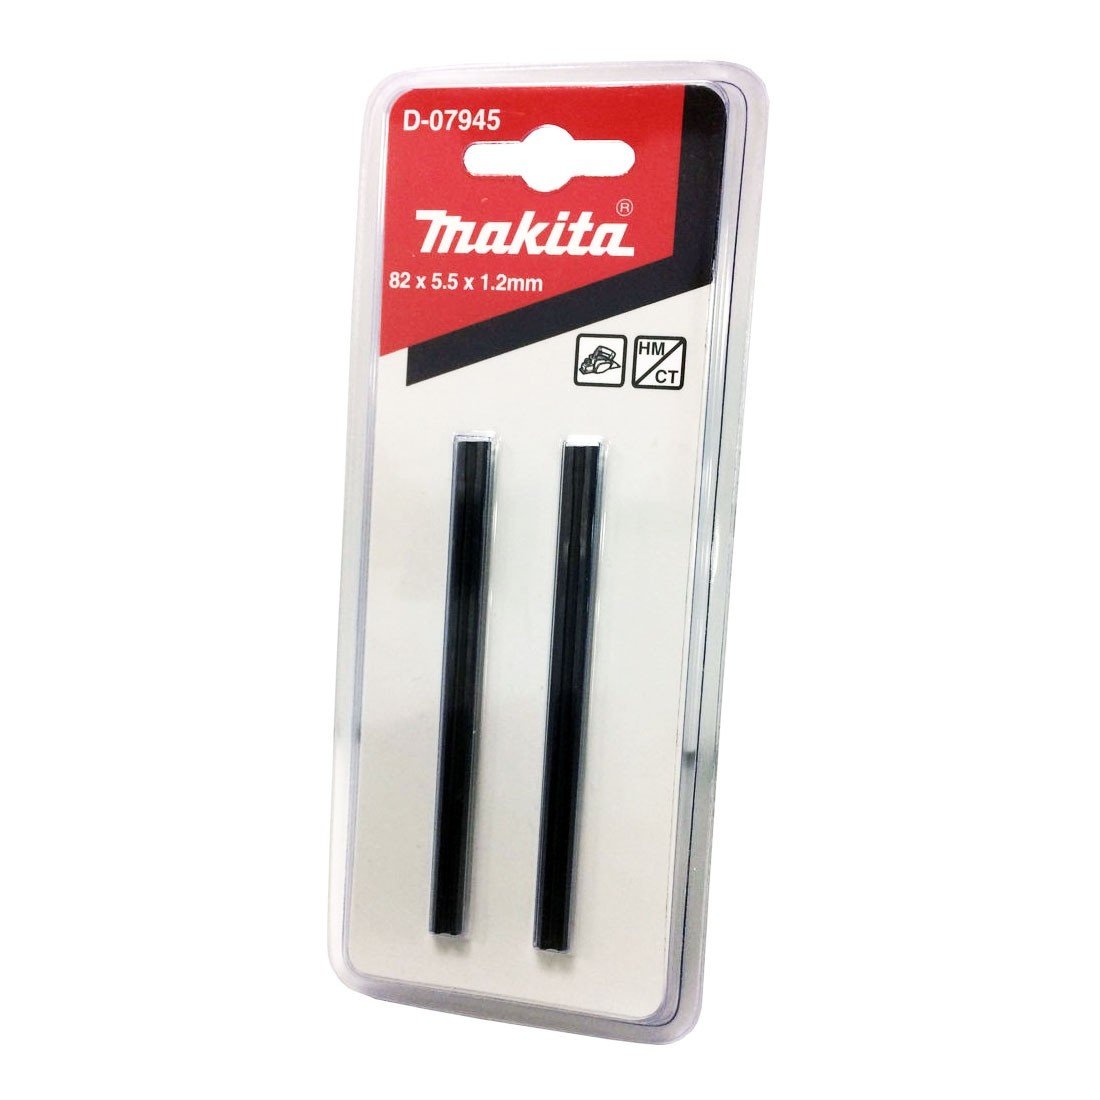 Makita 82mm Reversible TCT Planer Blades D-07945 Power Tool Services